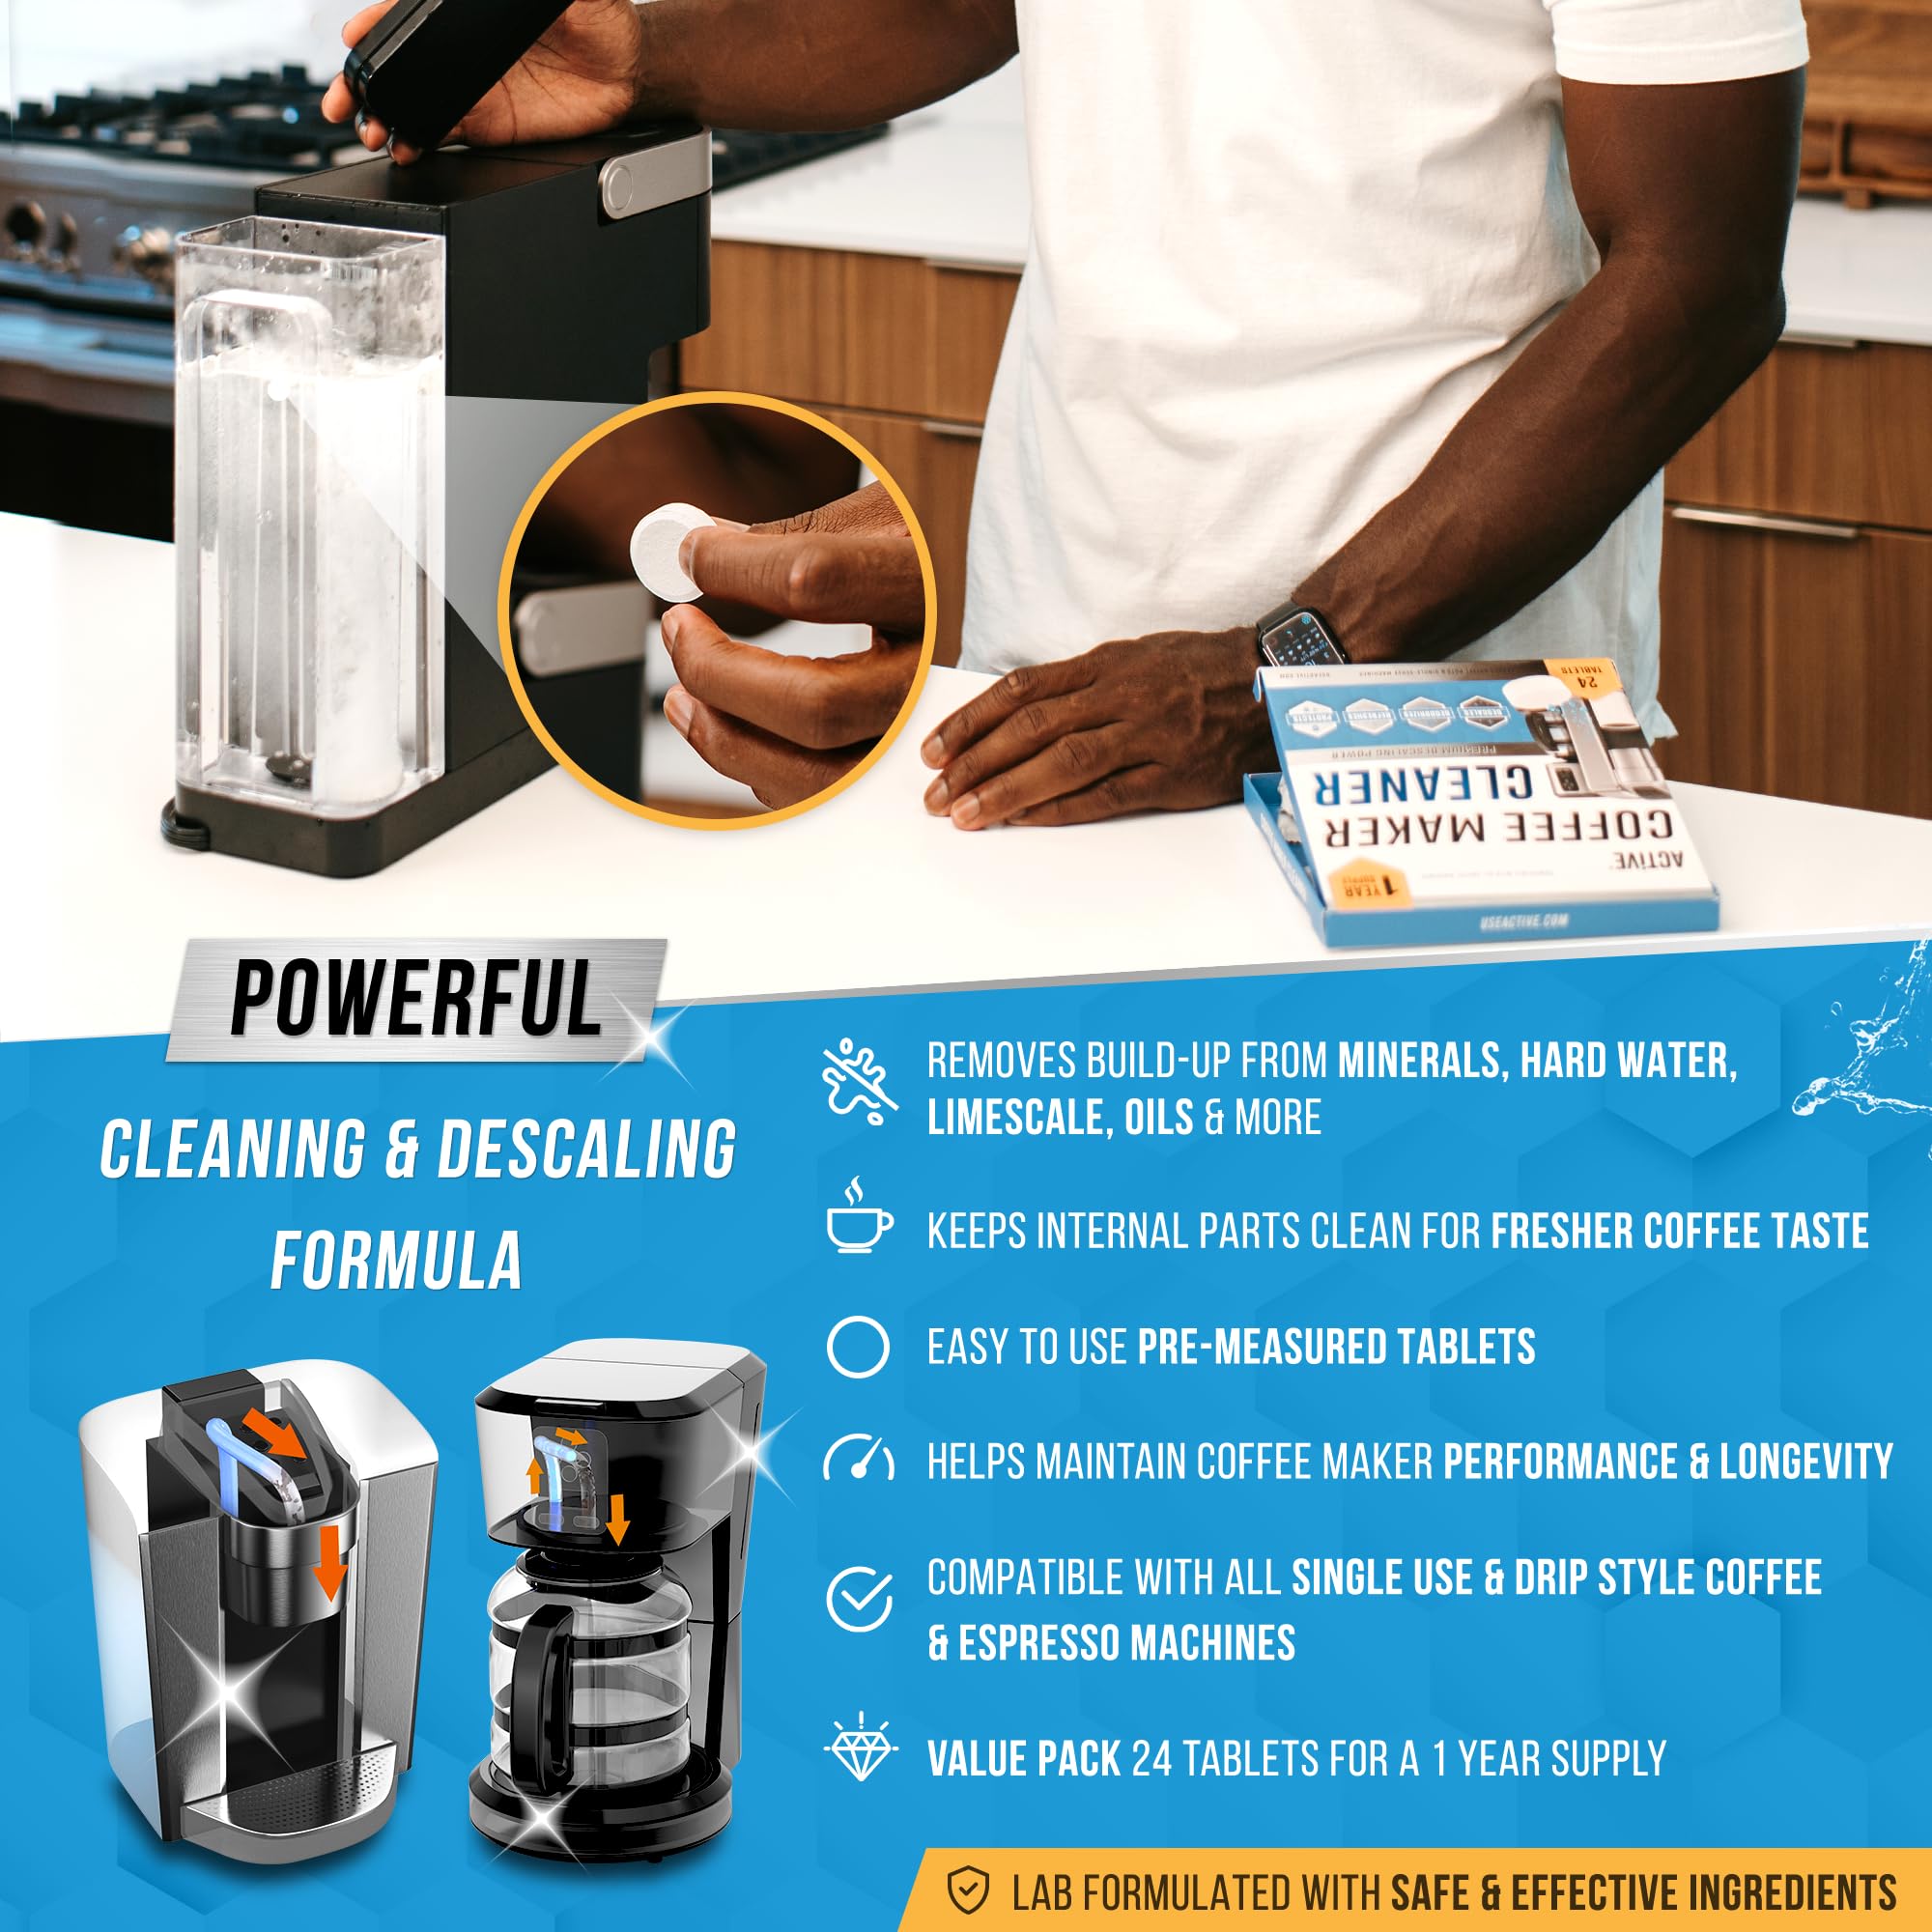 ACTIVE Coffee Maker Cleaner and Dishwasher Cleaner - Includes 24ct Coffee Maker Cleaning Tablets and 24ct Dishwasher Cleaning Tablets